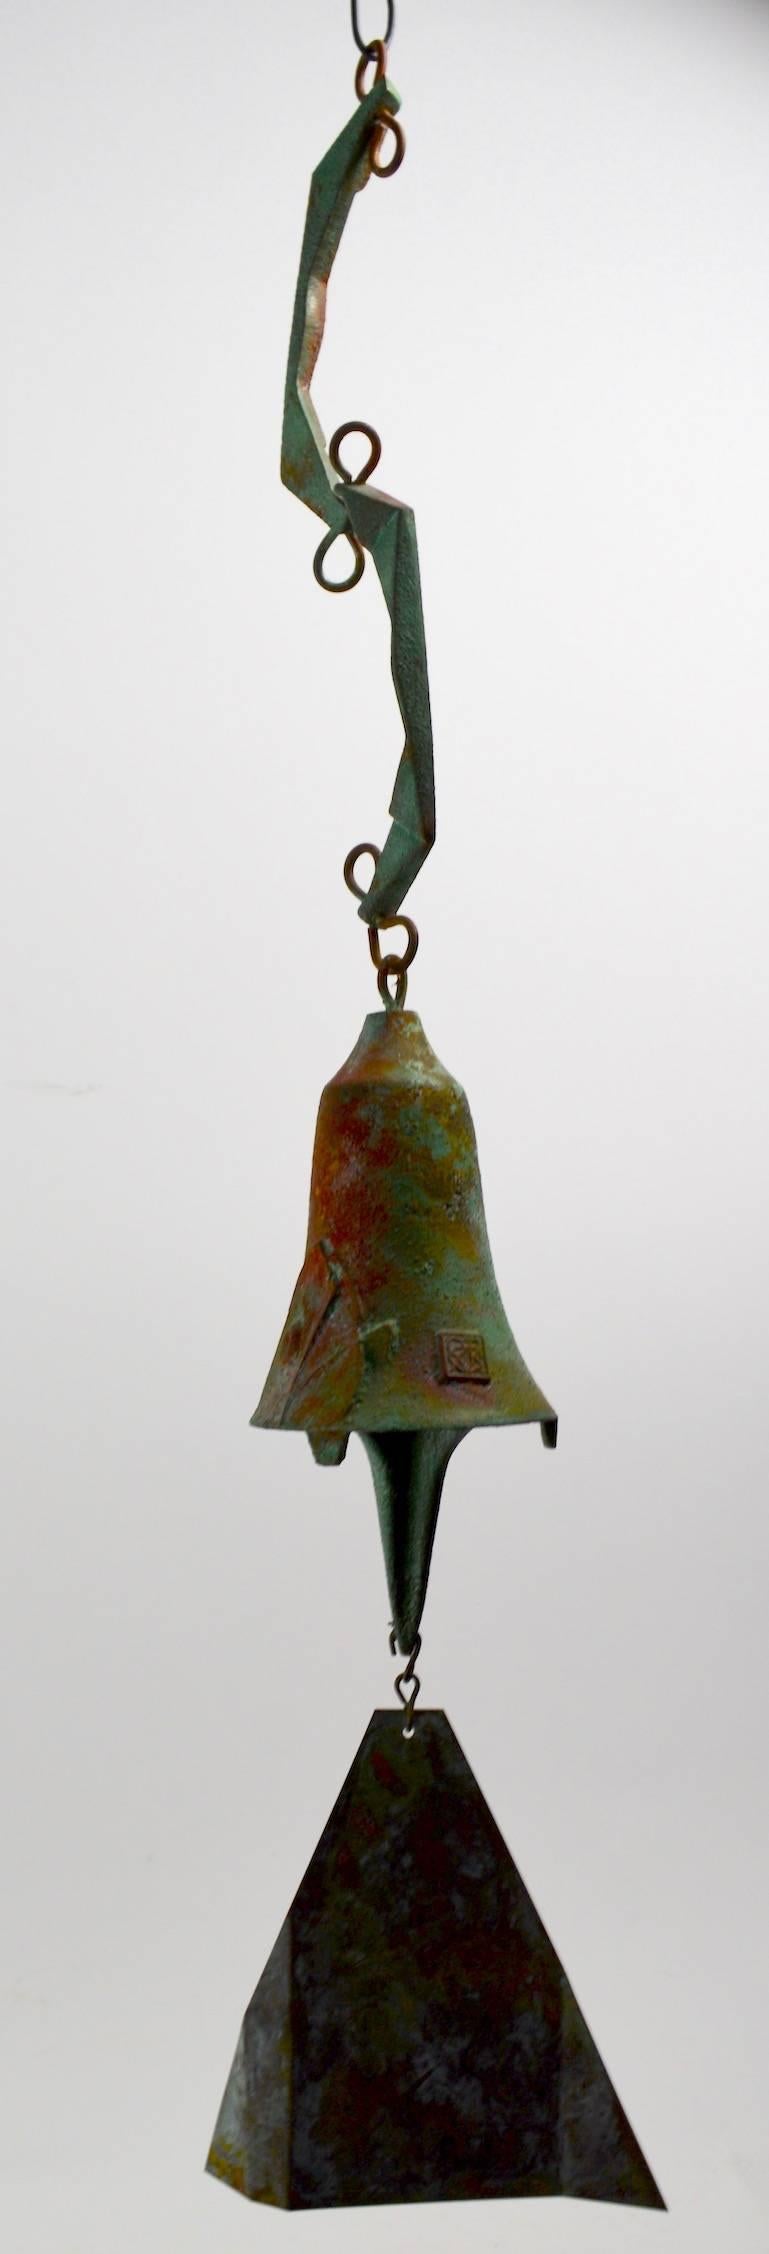 Bronze Wind Chime by Paolo Soleri 1